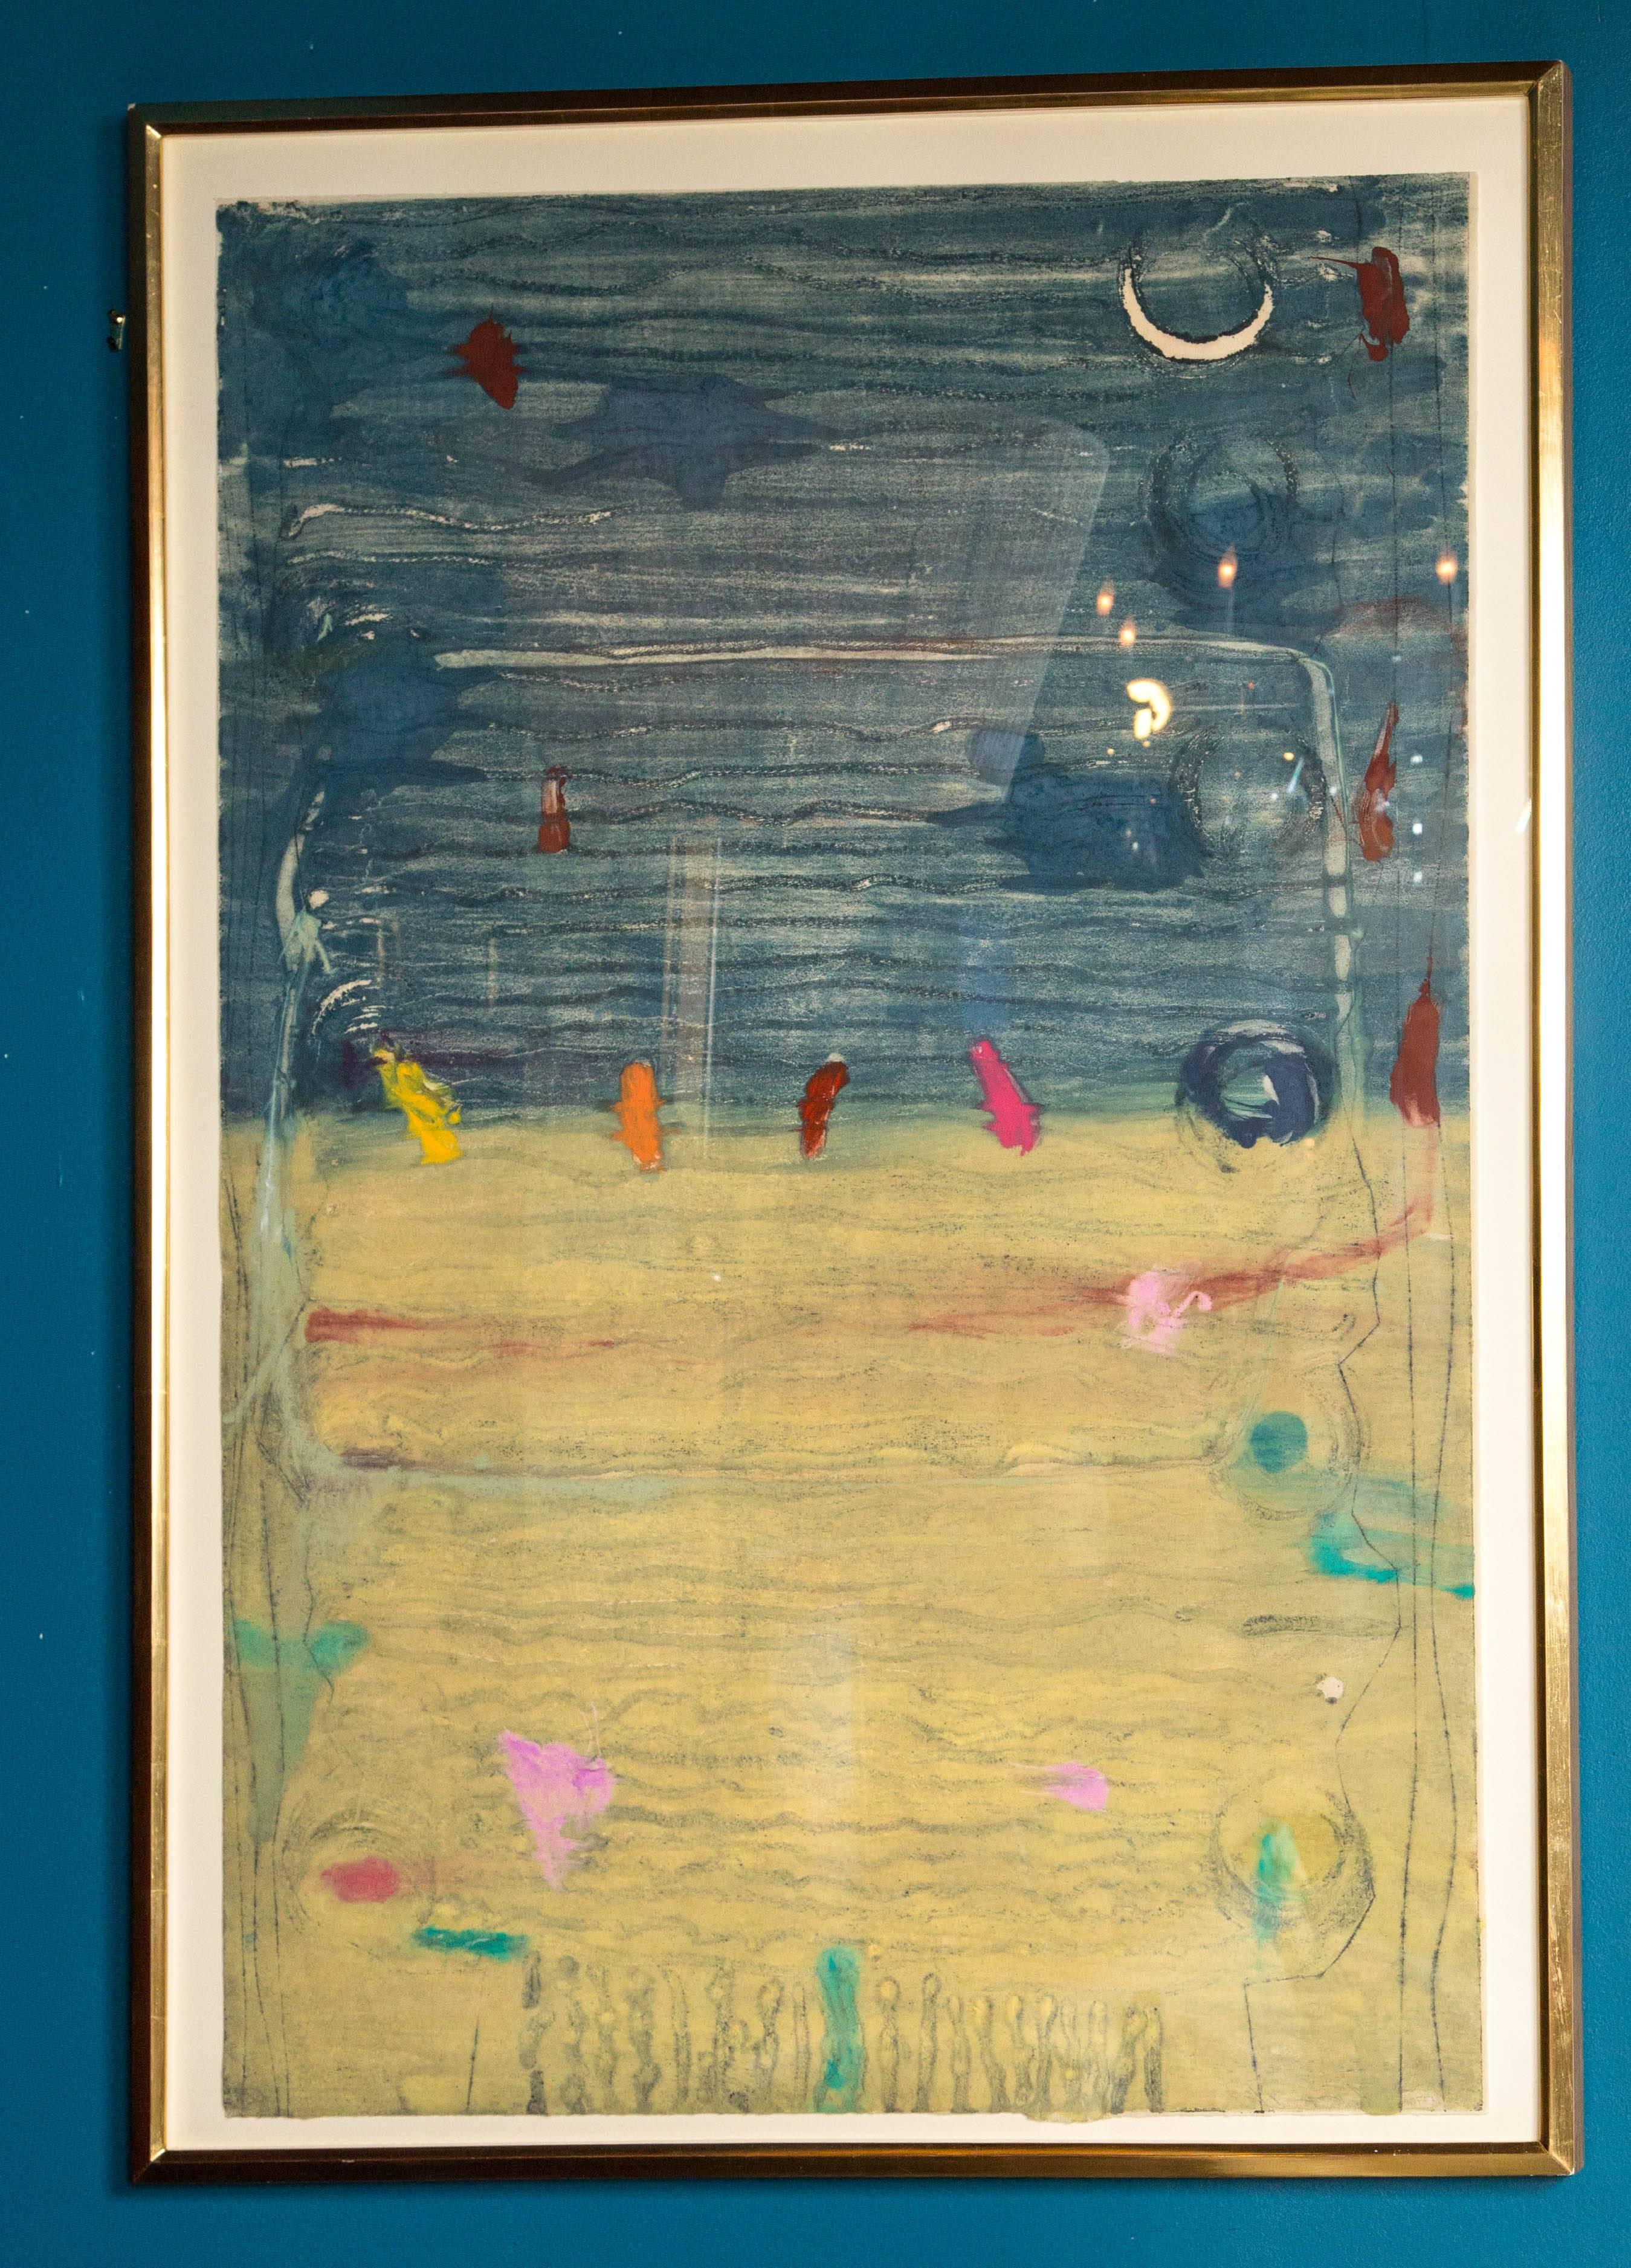 Large monotype. Wax reset technique. Gold leaf on the frame. Dark blue background with details in primary colors.